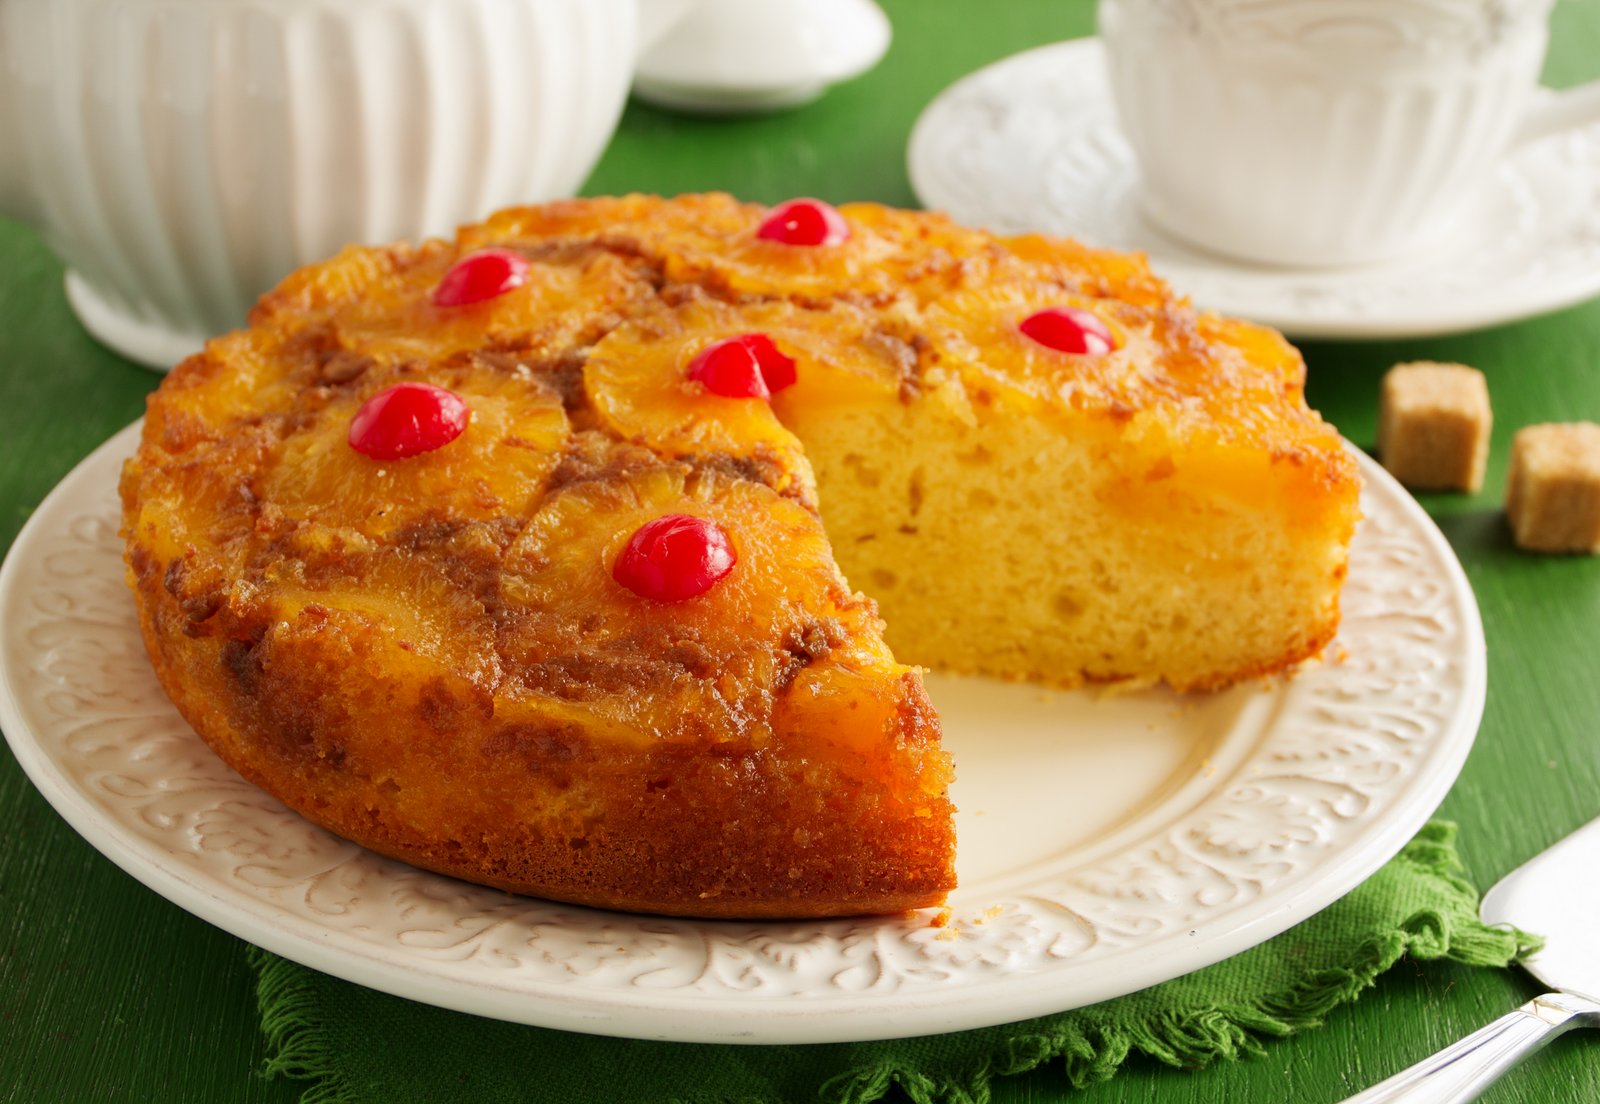 Can We Accurately Guess Your Age Based on How You Rate These Old-School Dishes? Pineapple upside down cake